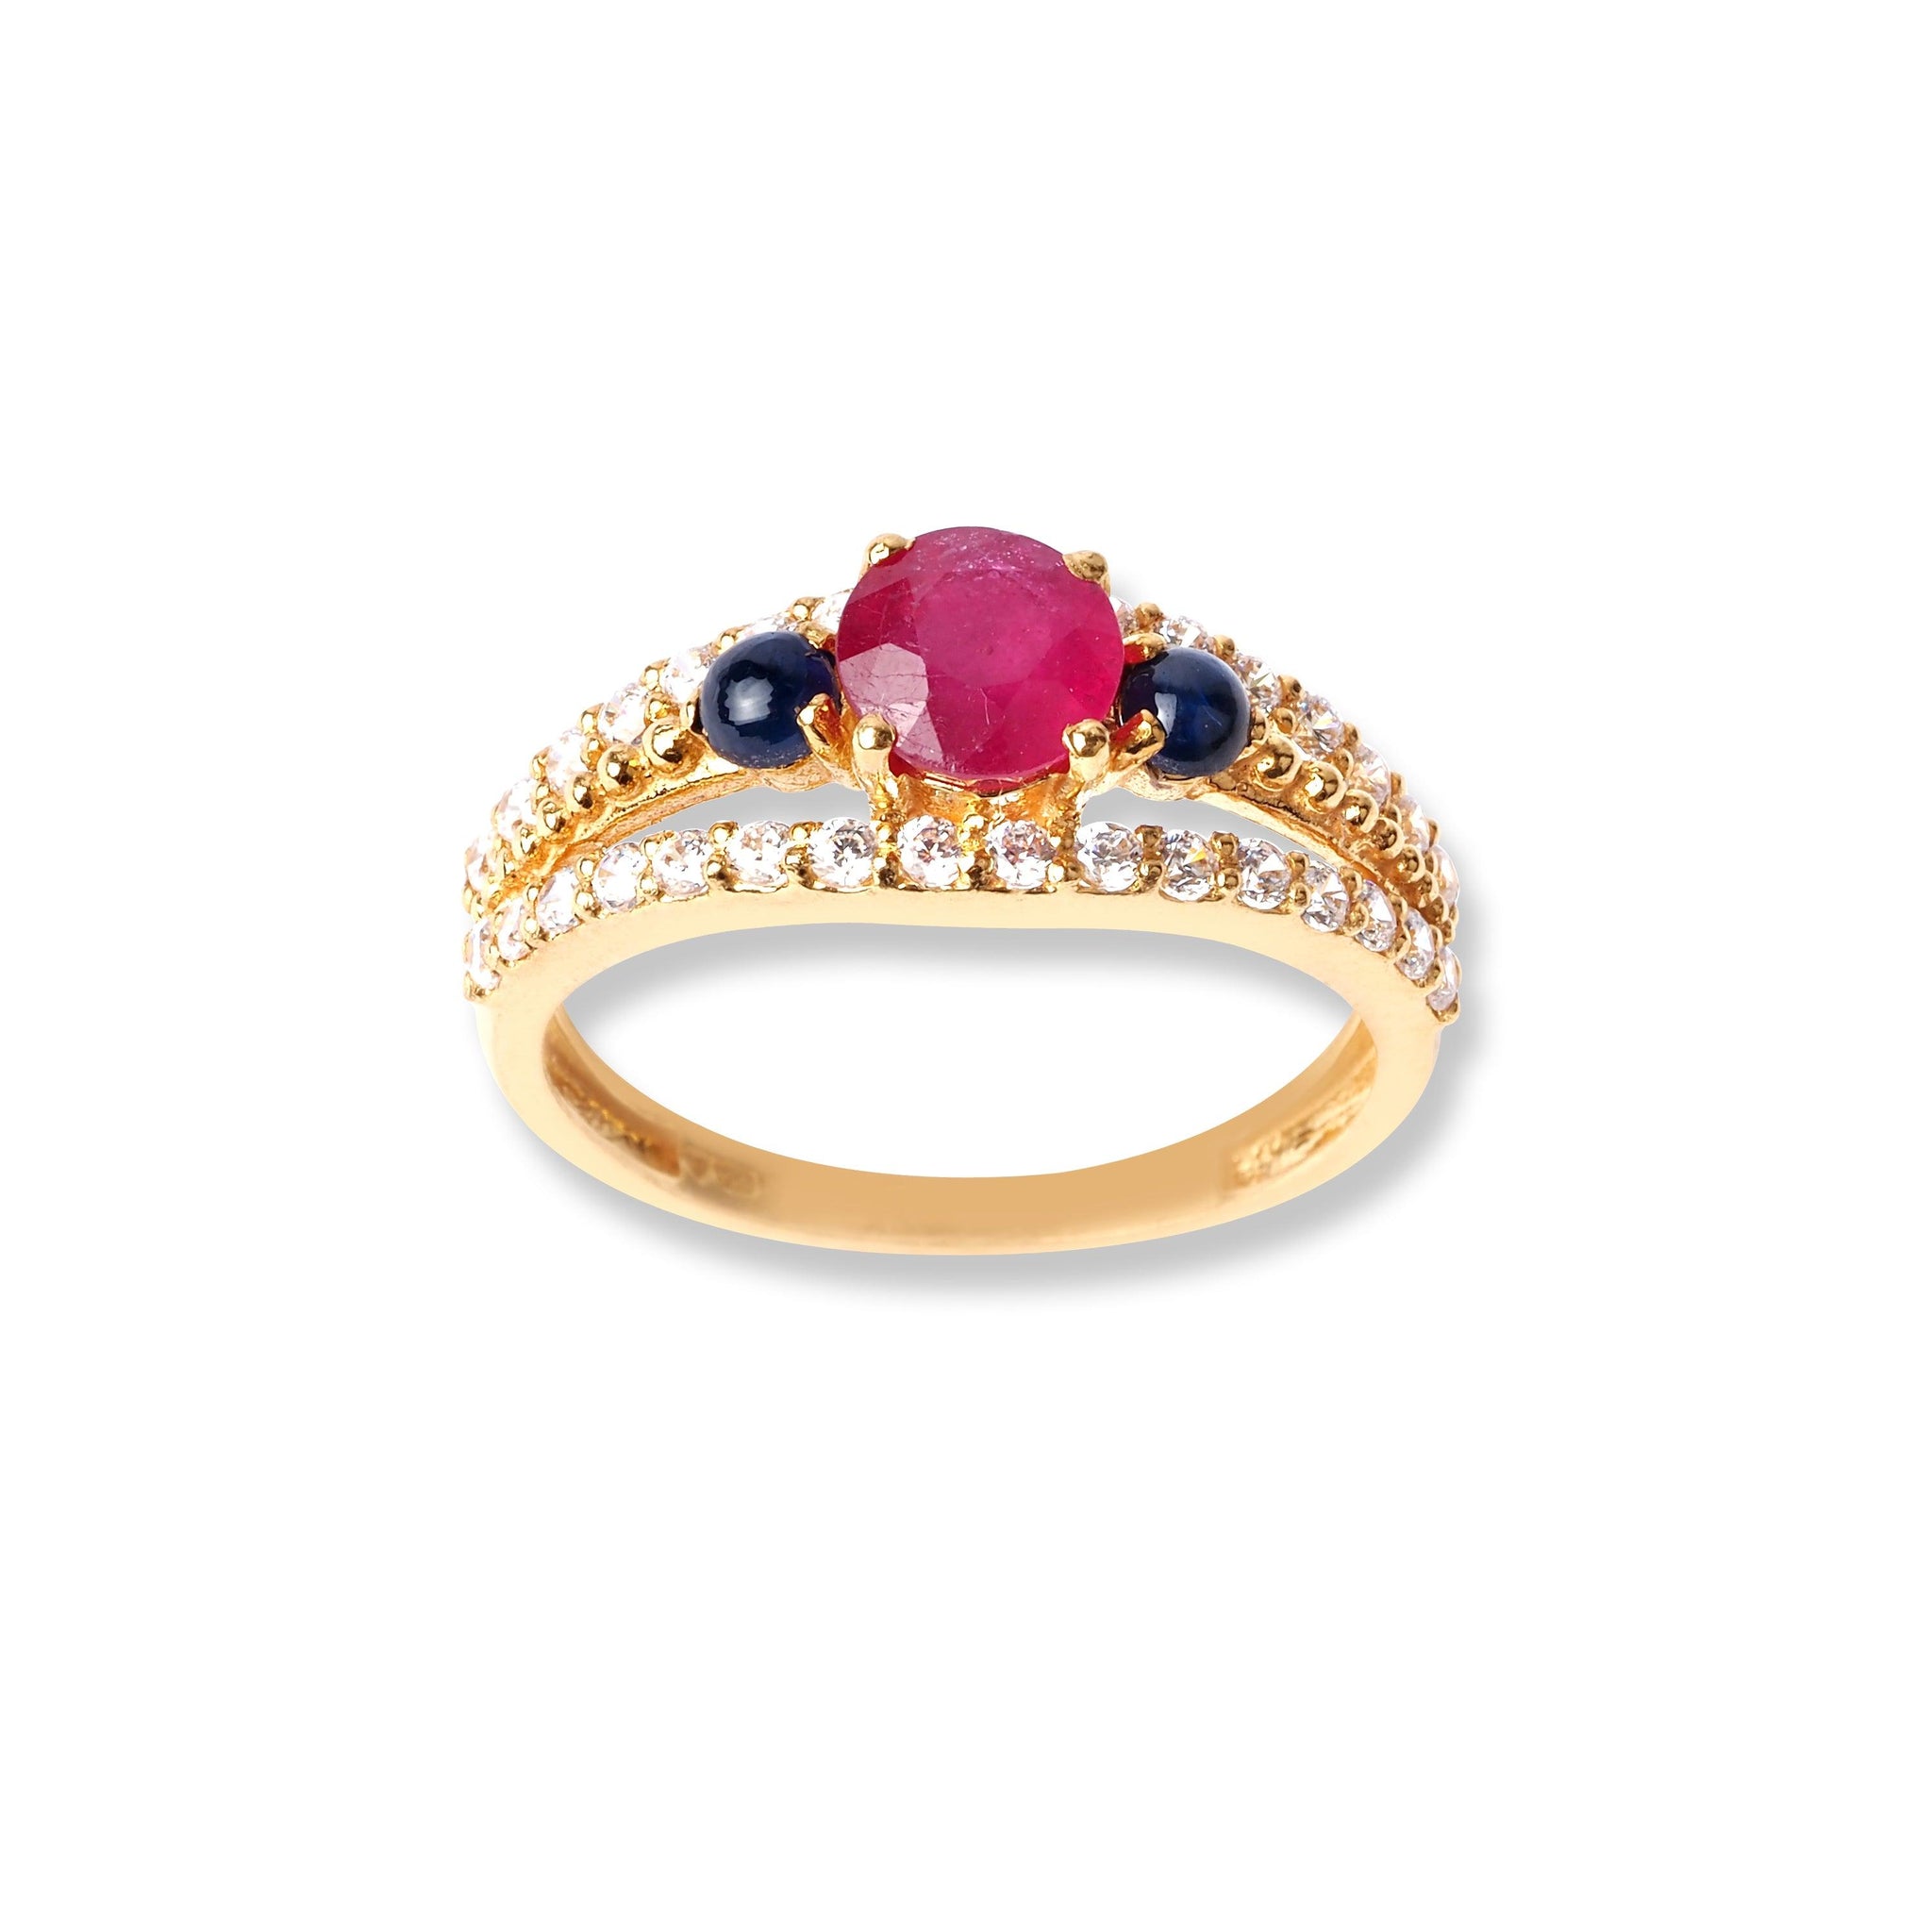 22ct Yellow Gold Ring with Pink, Navy & White Cubic Zirconia Stones (3.9g) LR-16585